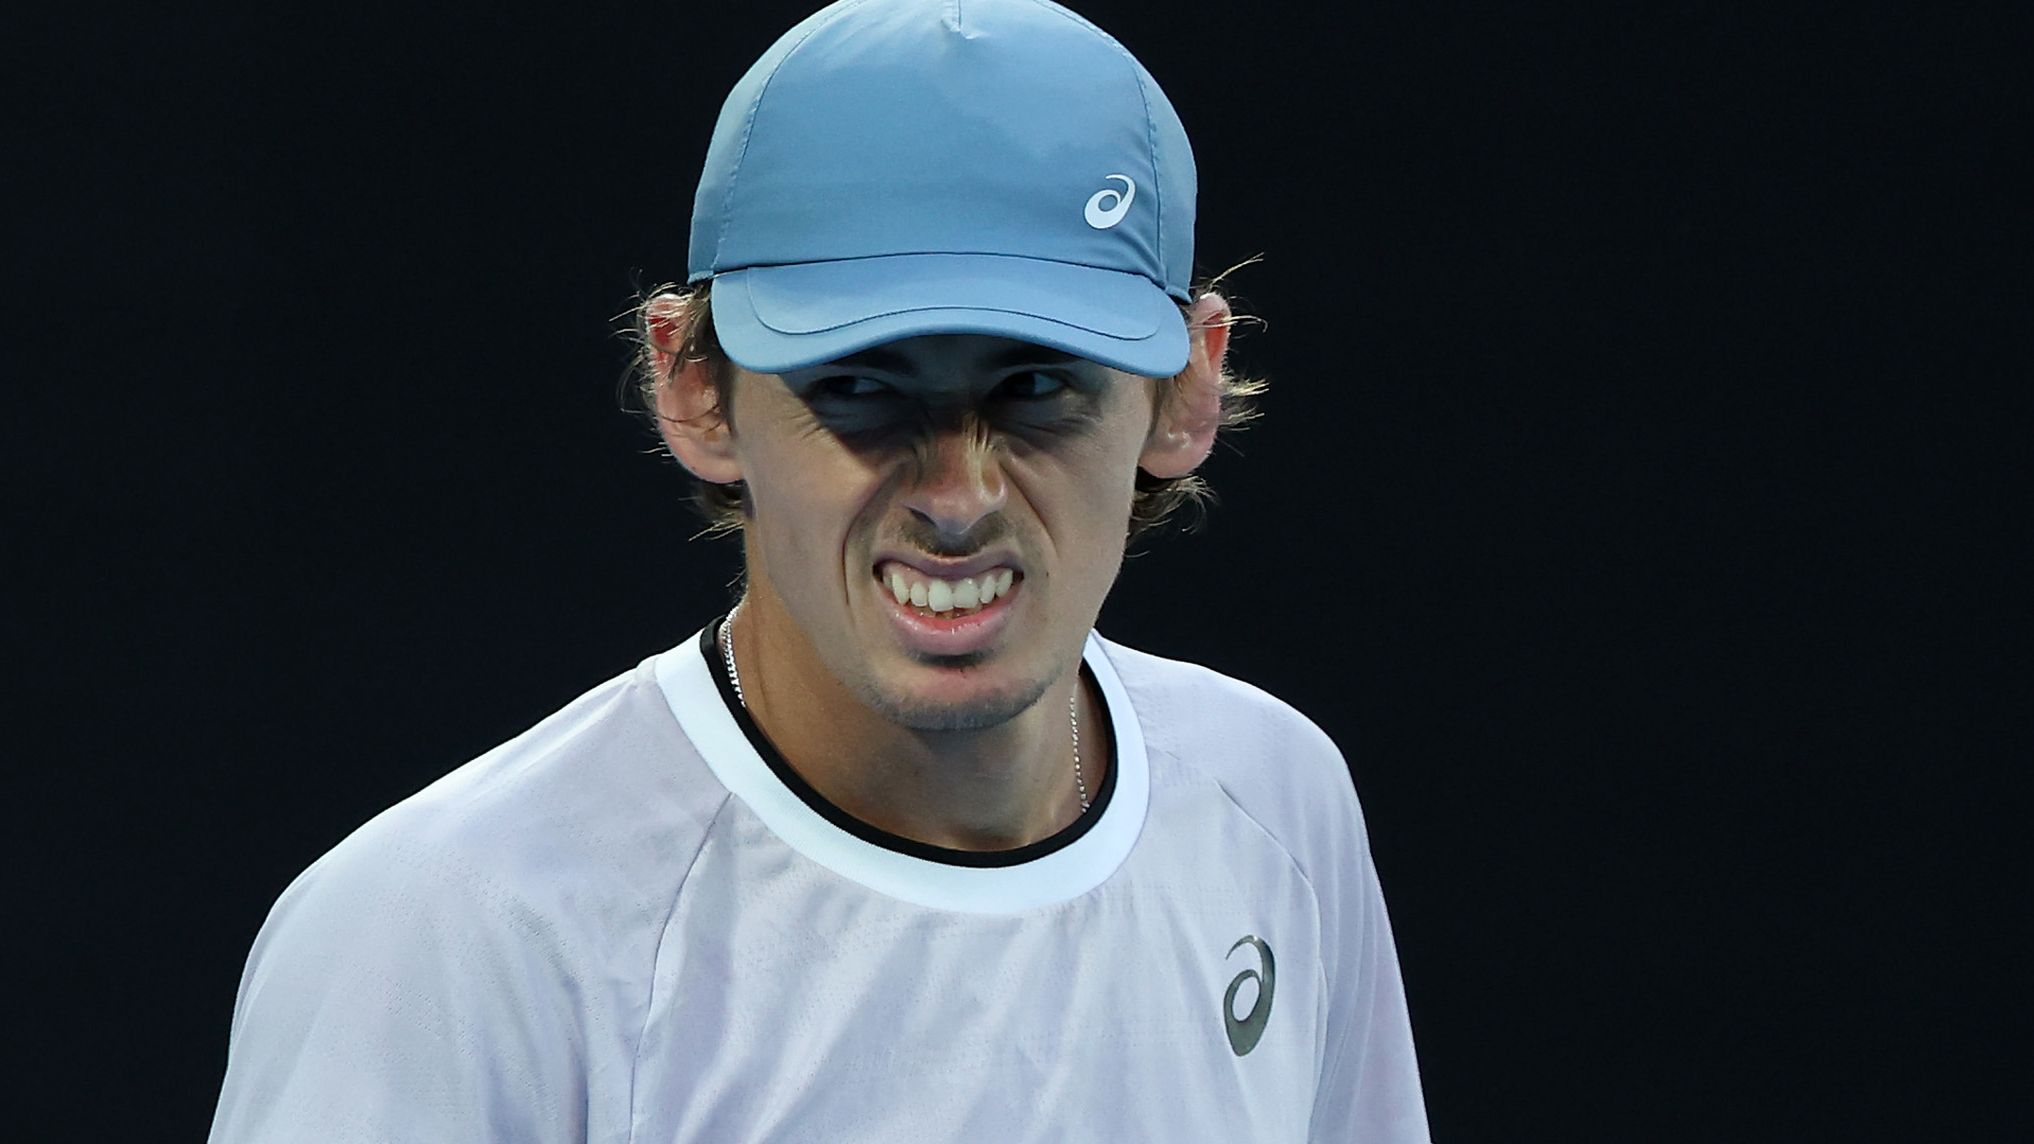 'Always create controversy': Alex de Minaur hits out at storm created by comments on Novak Djokovic injury